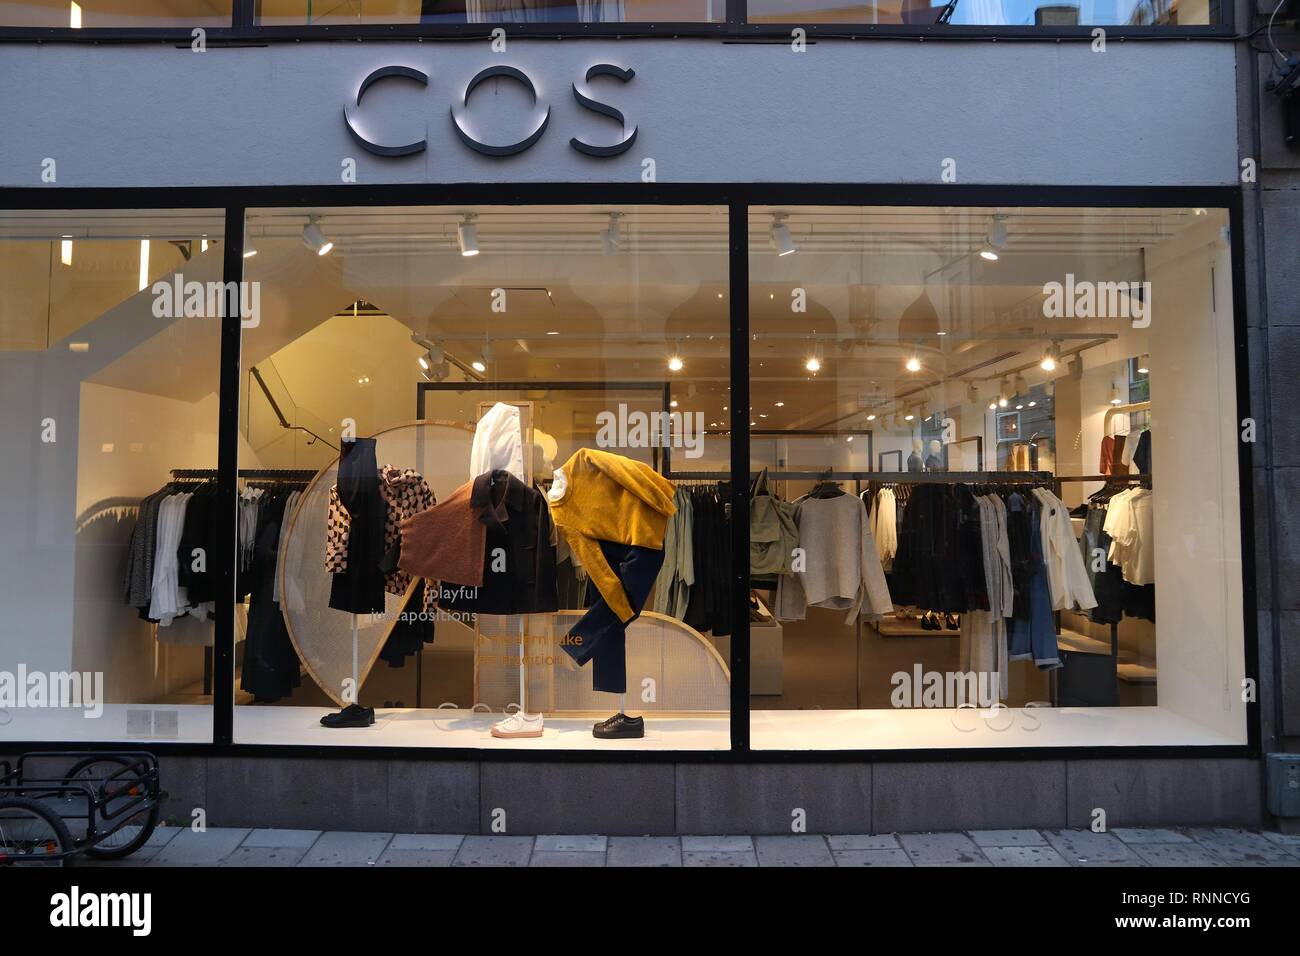 STOCKHOLM, SWEDEN - AUGUST 22, 2018: Cos fashion store in Stockholm,  Sweden. The brand Cos belongs to H&M fashion company Stock Photo - Alamy